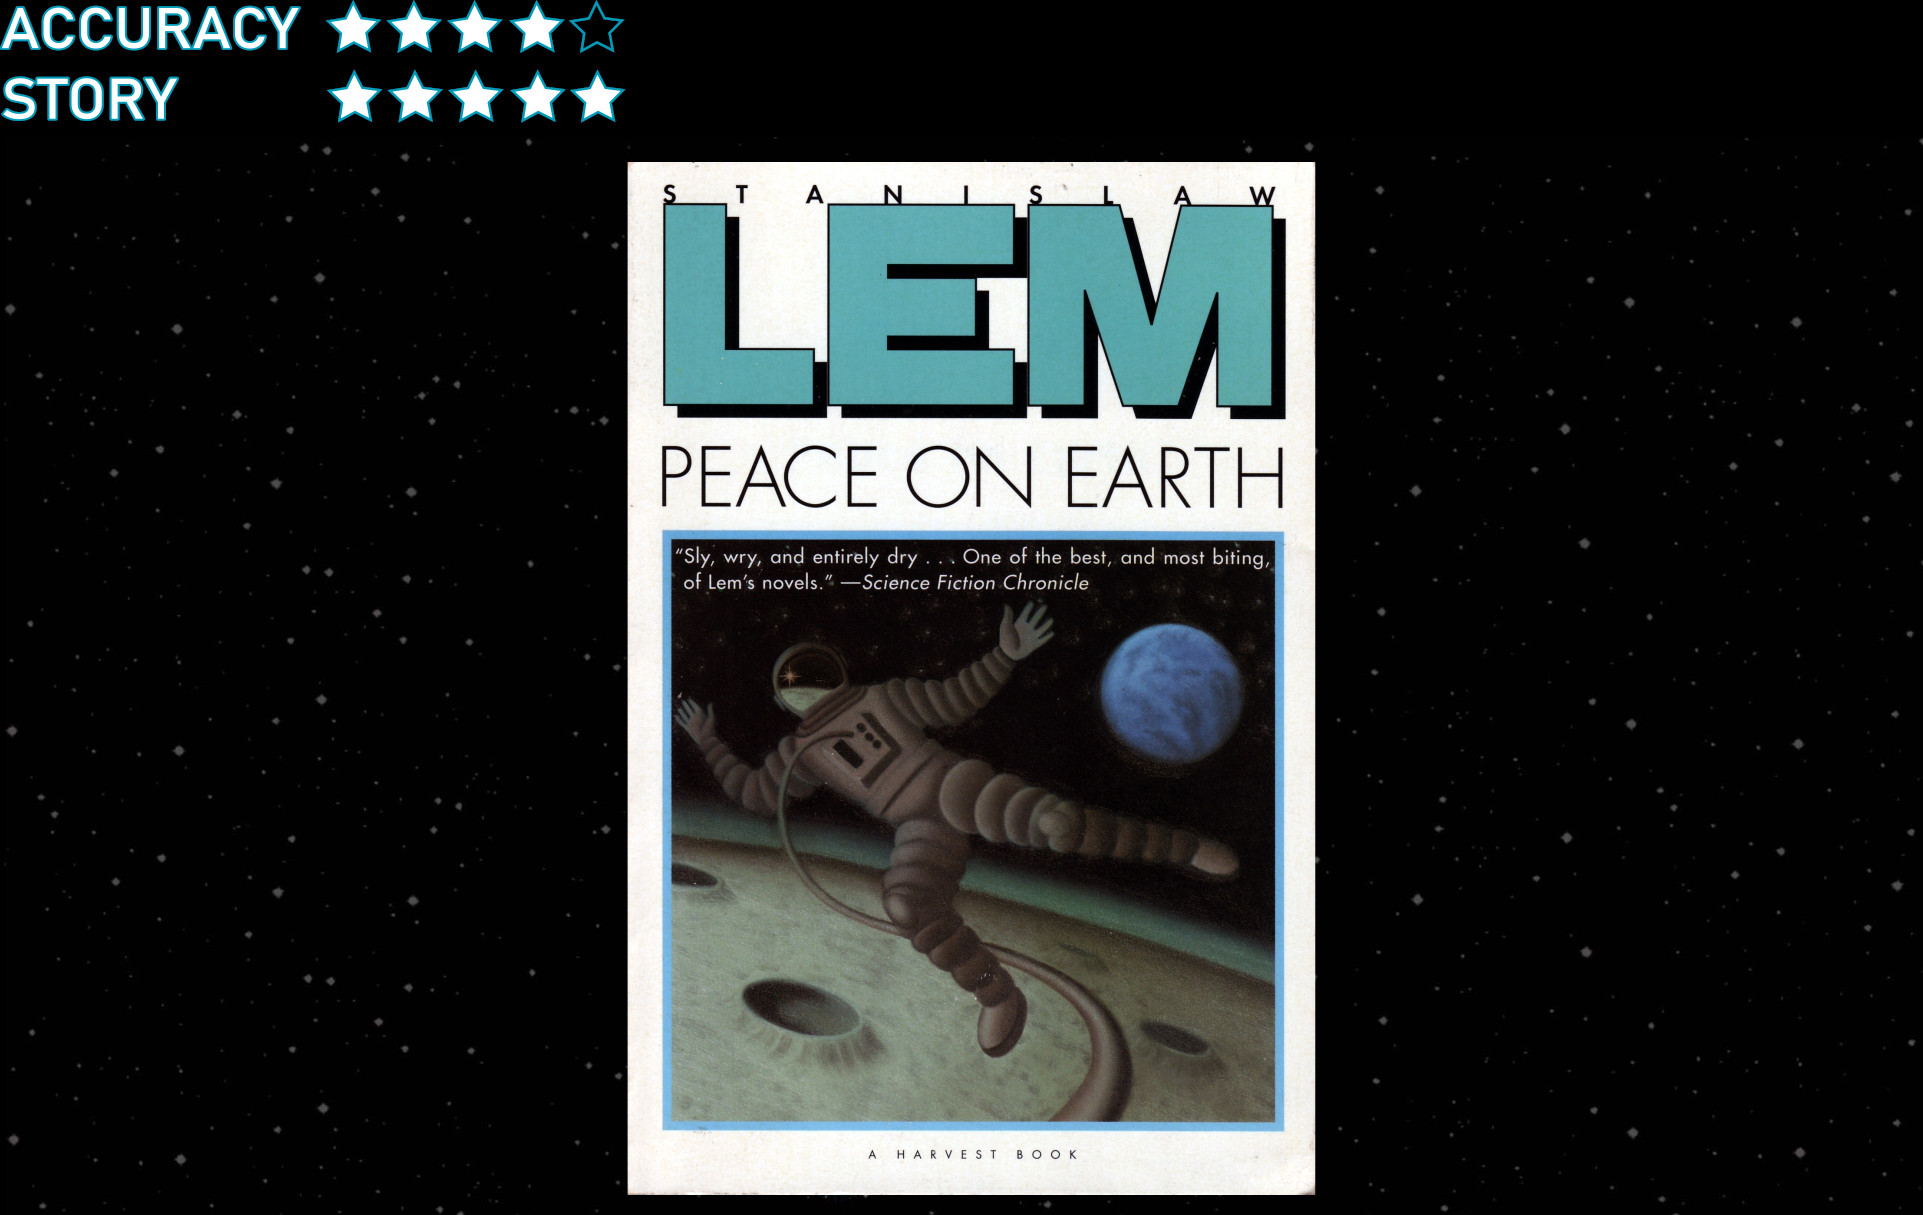 Peace on Earth (1987): Using telerobotics to check in on a swarm robot uprising on the Moon